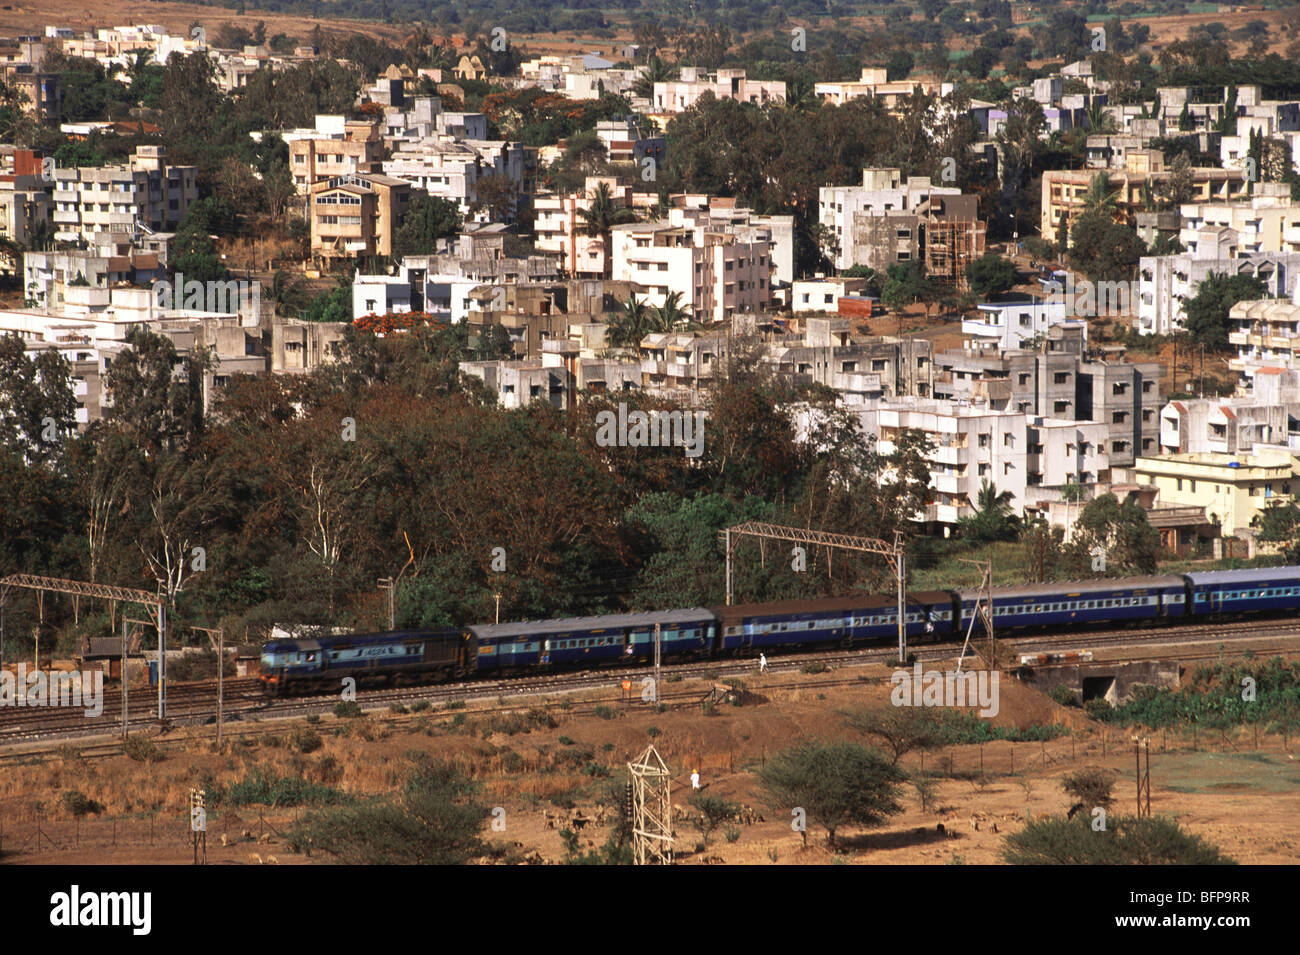 NMK 65300 : Aerial view of dense buildings & railway track with Deccan Express Talegaon ; Pune ; Maharashtra ; India Stock Photo